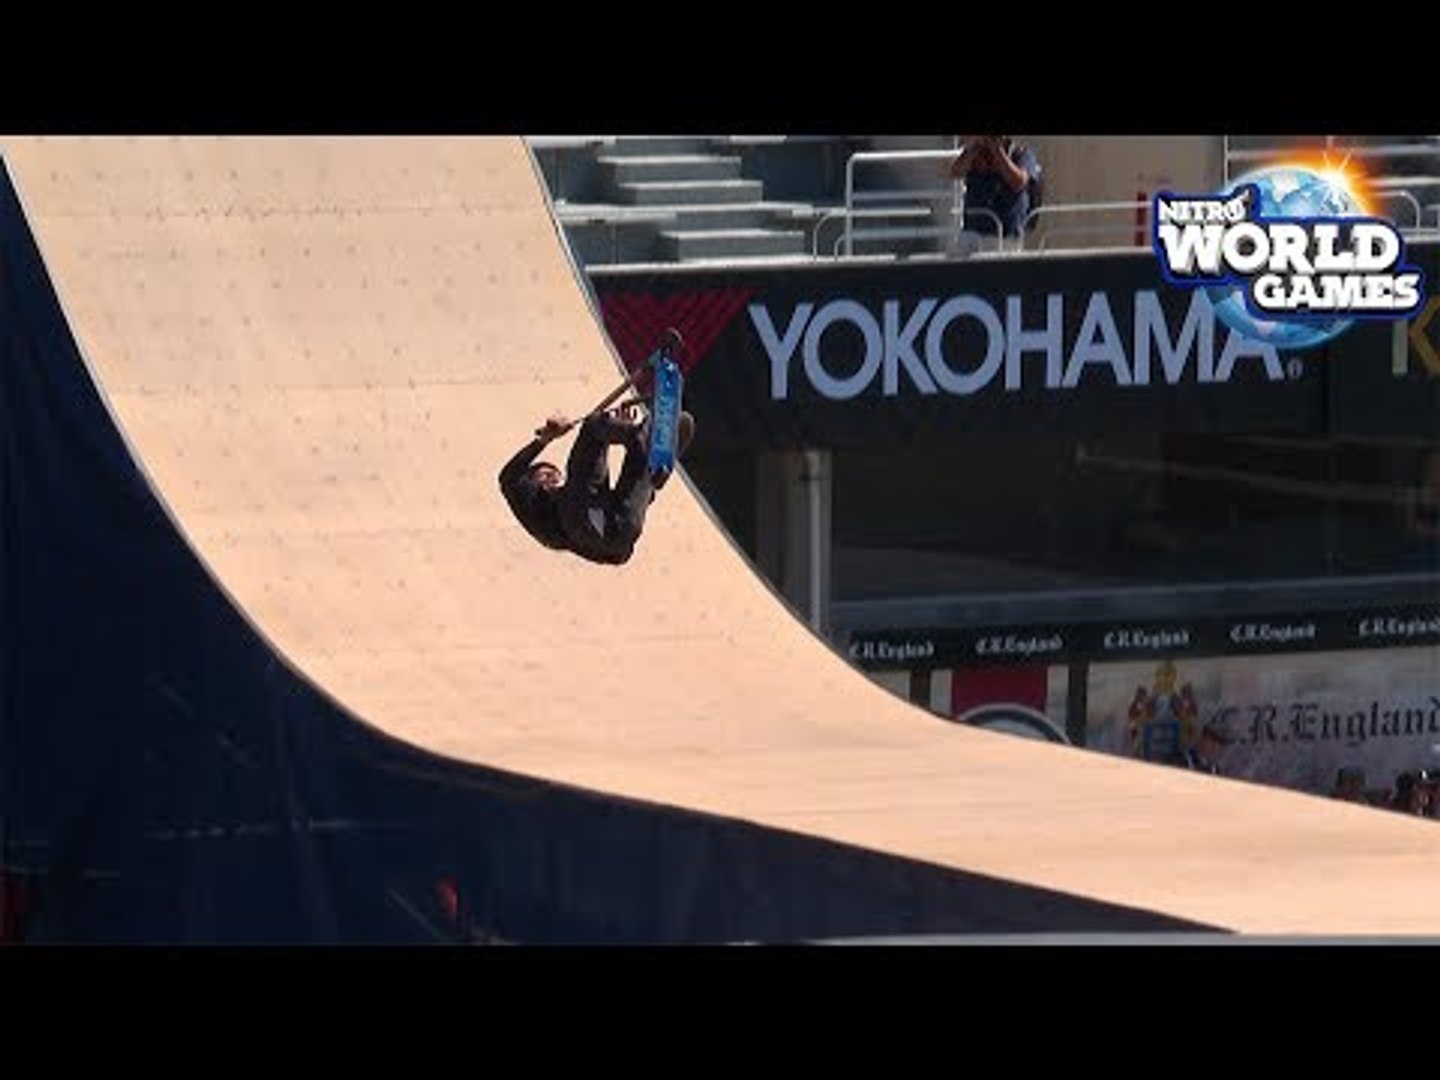 Scooter Best Tricks Highlights - Nitro World Games 2017 - video Dailymotion